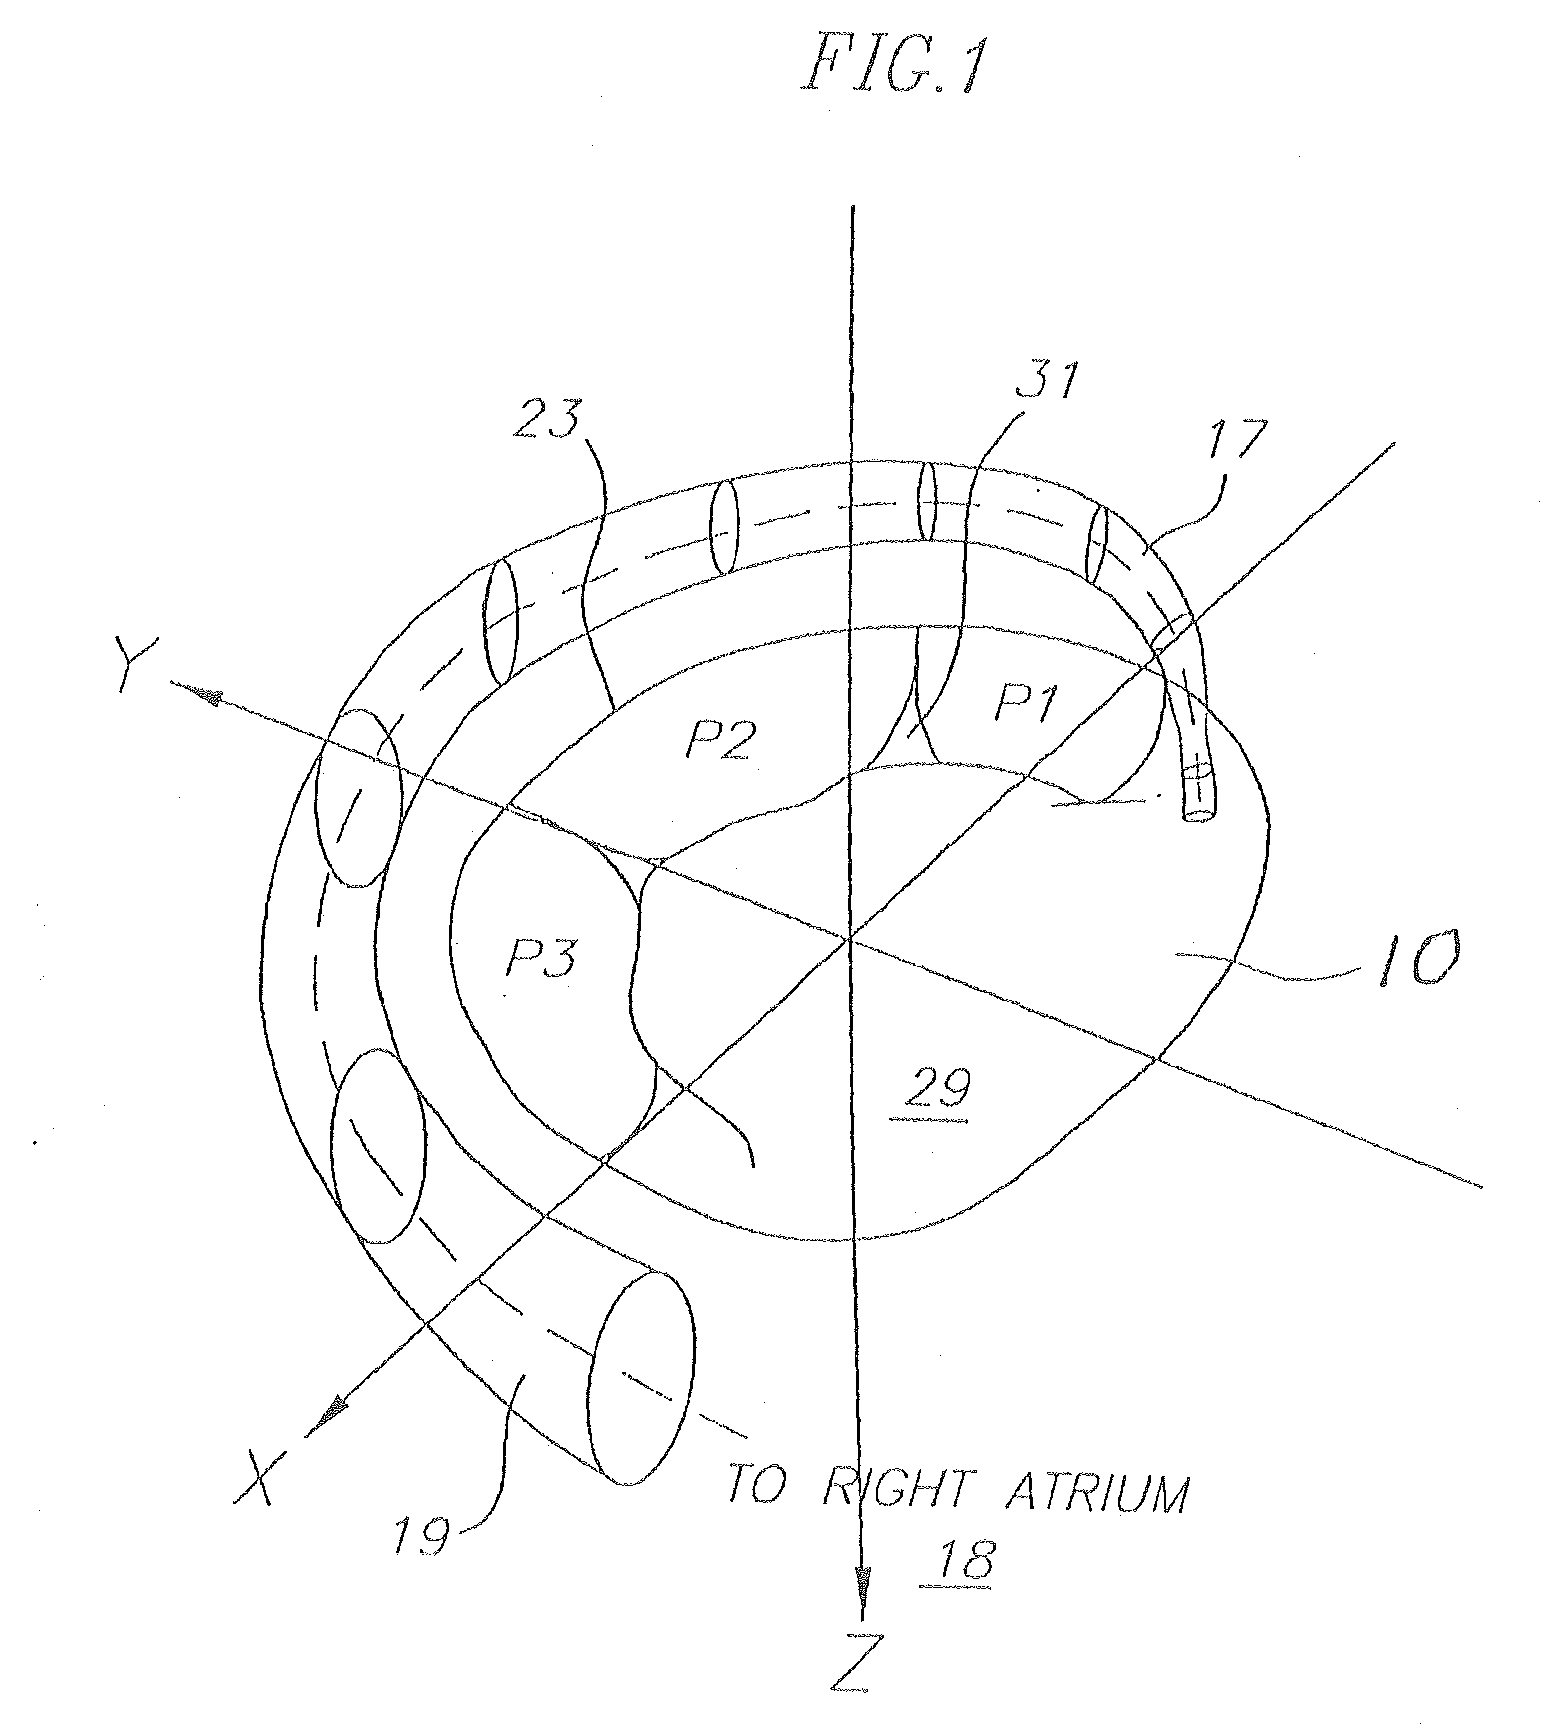 Medical implant with reinforcement mechanism